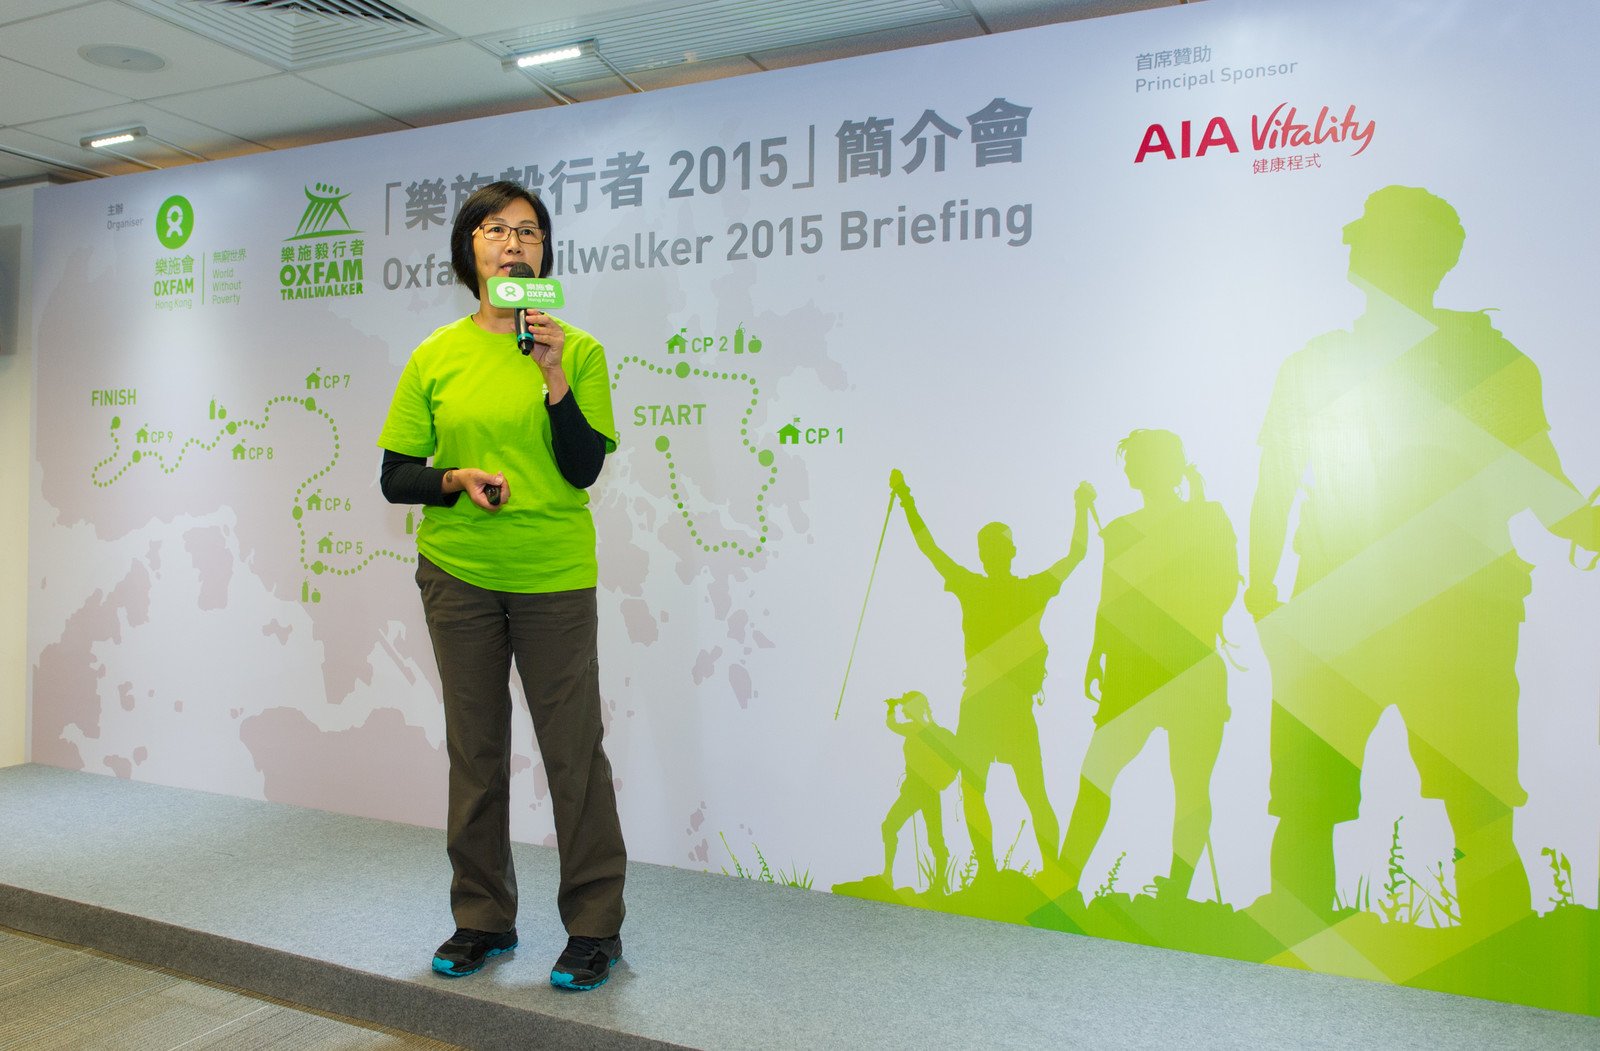 Ms. Brenda Wong, Acting Director of Fundraising and Communications (Fundraising), Oxfam Hong Kong, briefed walkers and their supporters on event details and safety measures.